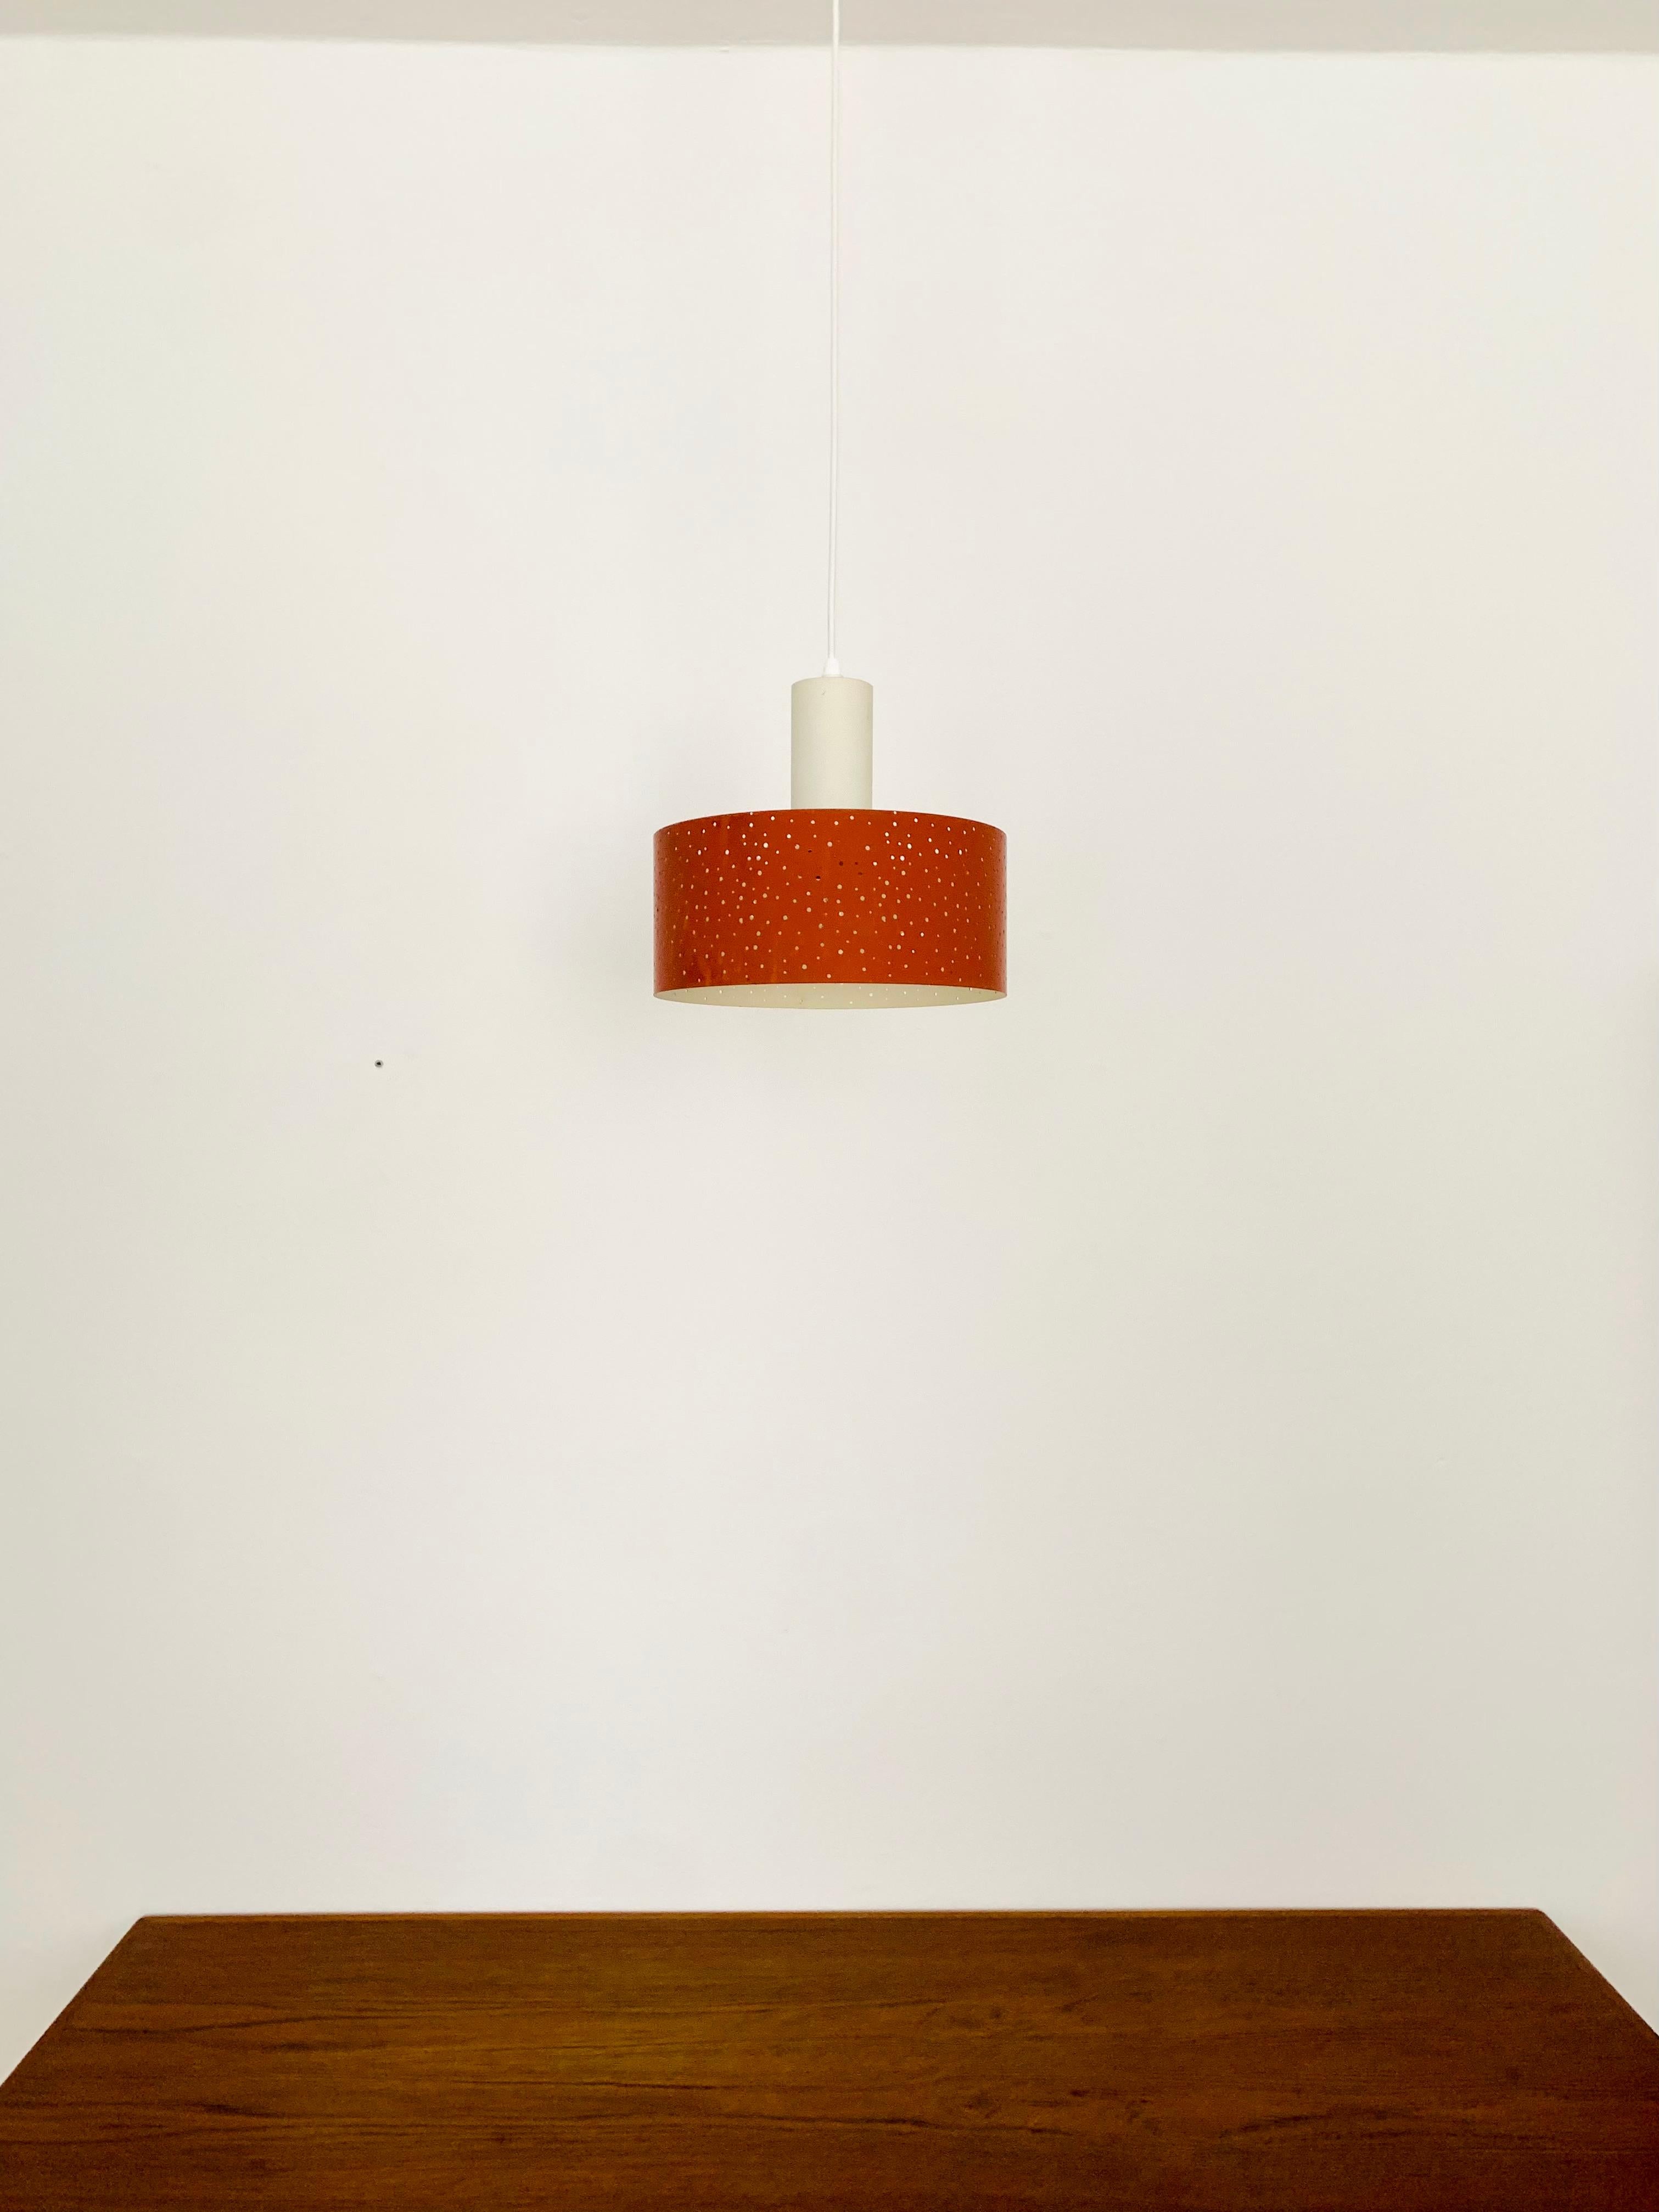 Perforated Metal Pendant Lamp by Ernst Igl for Hillebrand  In Good Condition For Sale In München, DE